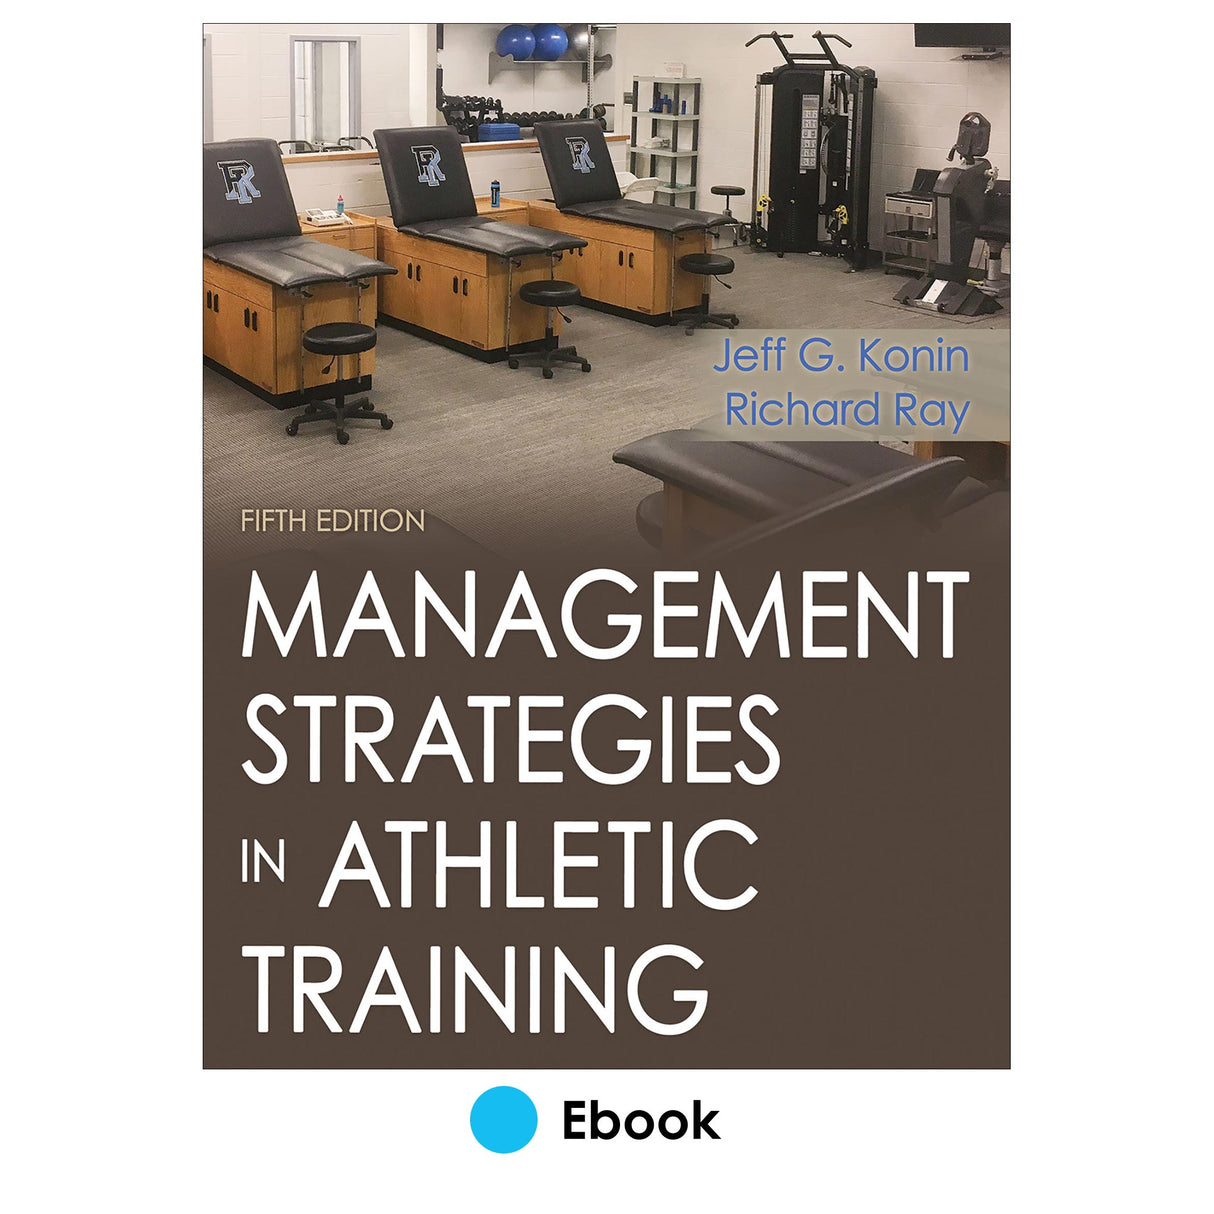 Management Strategies in Athletic Training 5th Edition PDF